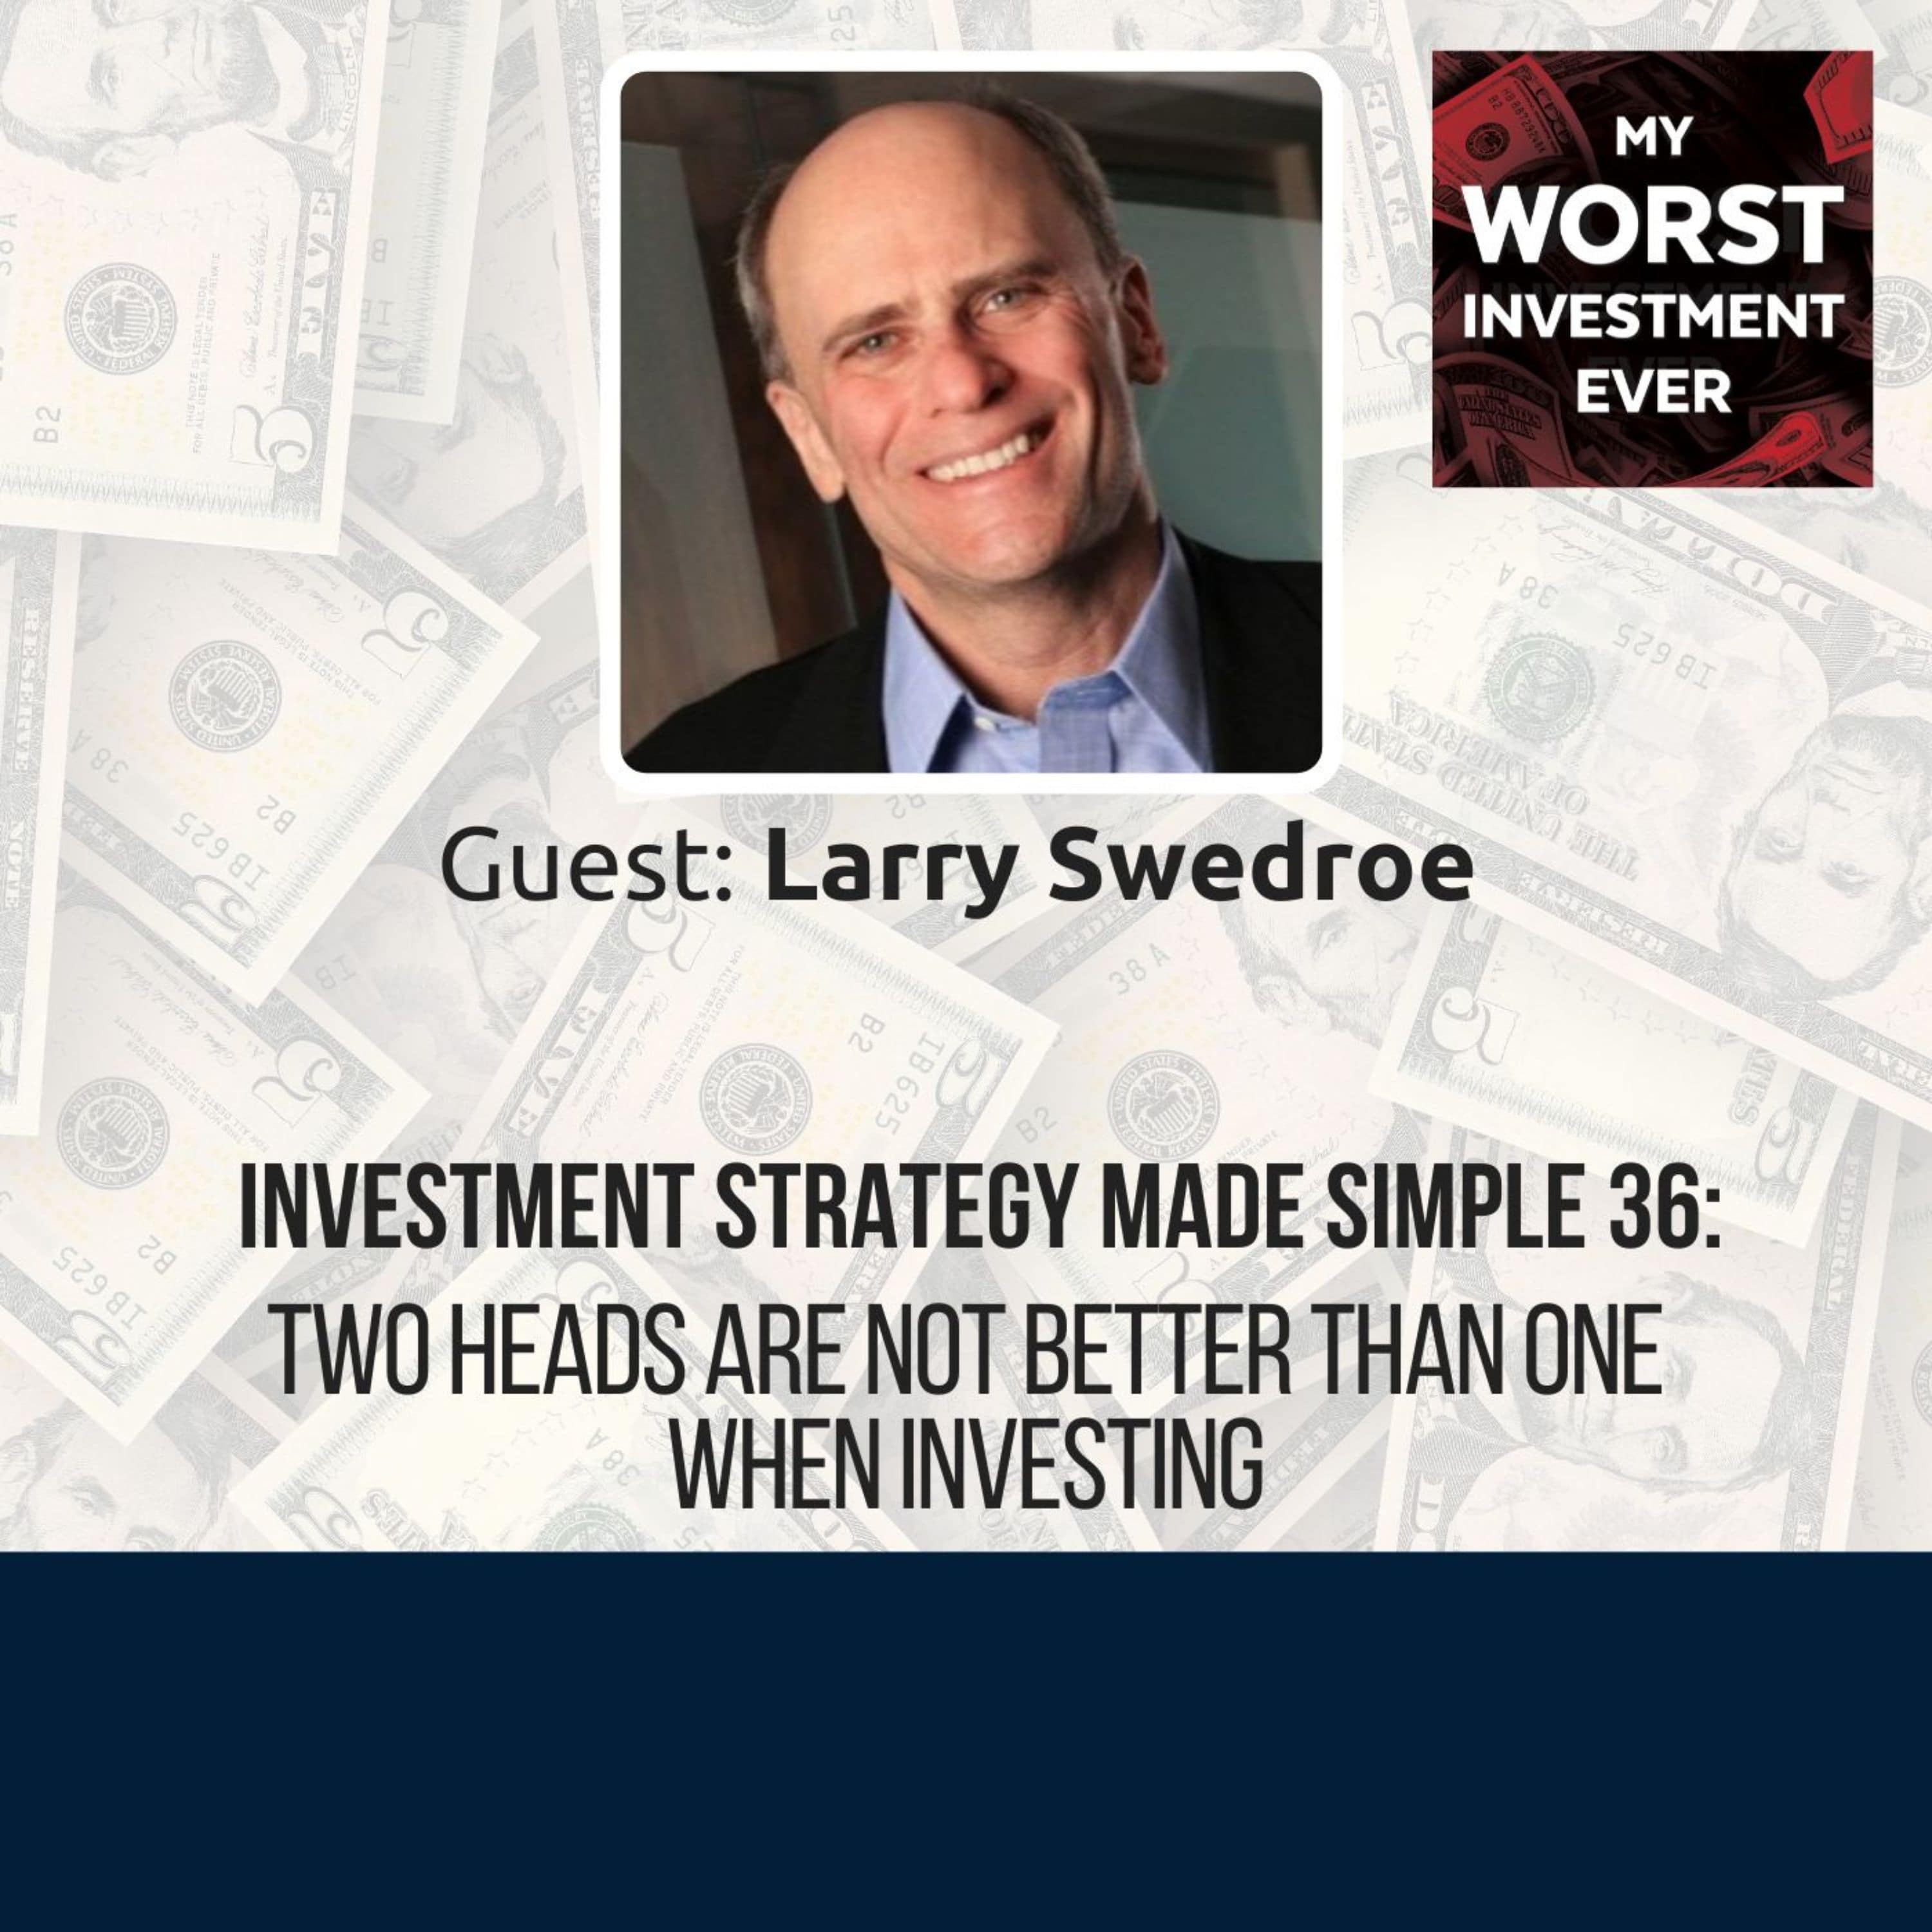 ISMS 36: Larry Swedroe – Two Heads Are Not Better Than One When Investing